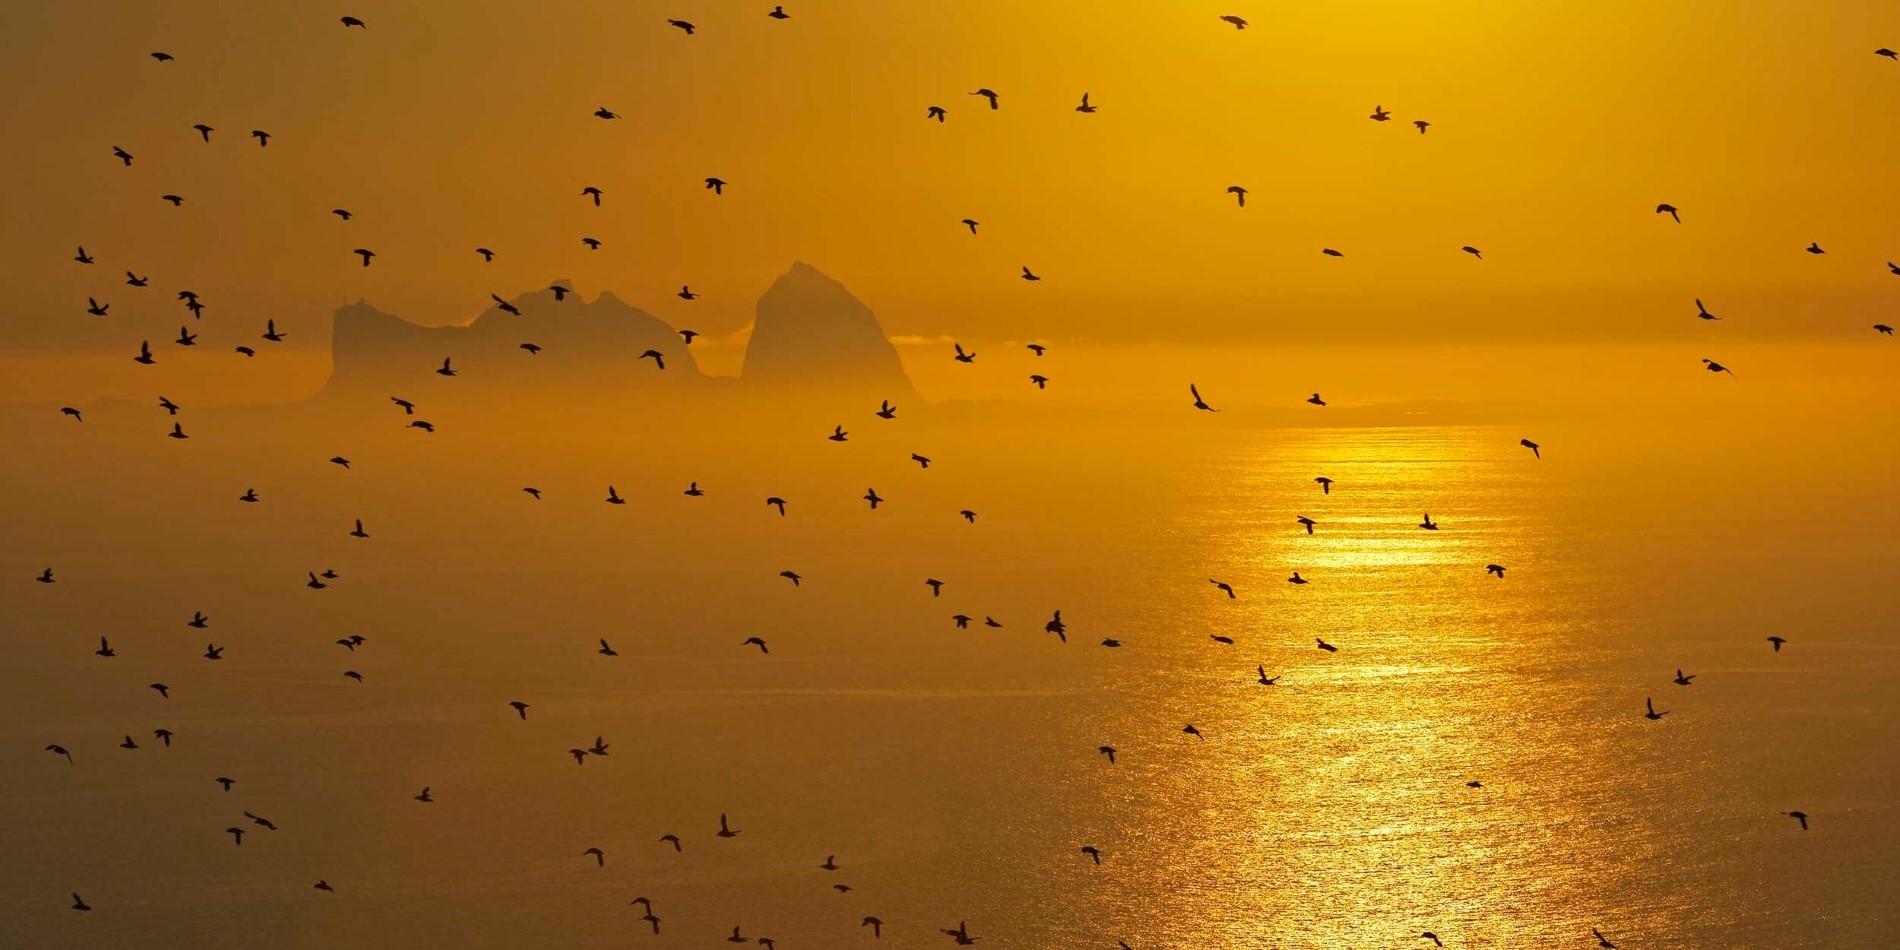 A flock of birds flying over a body of water